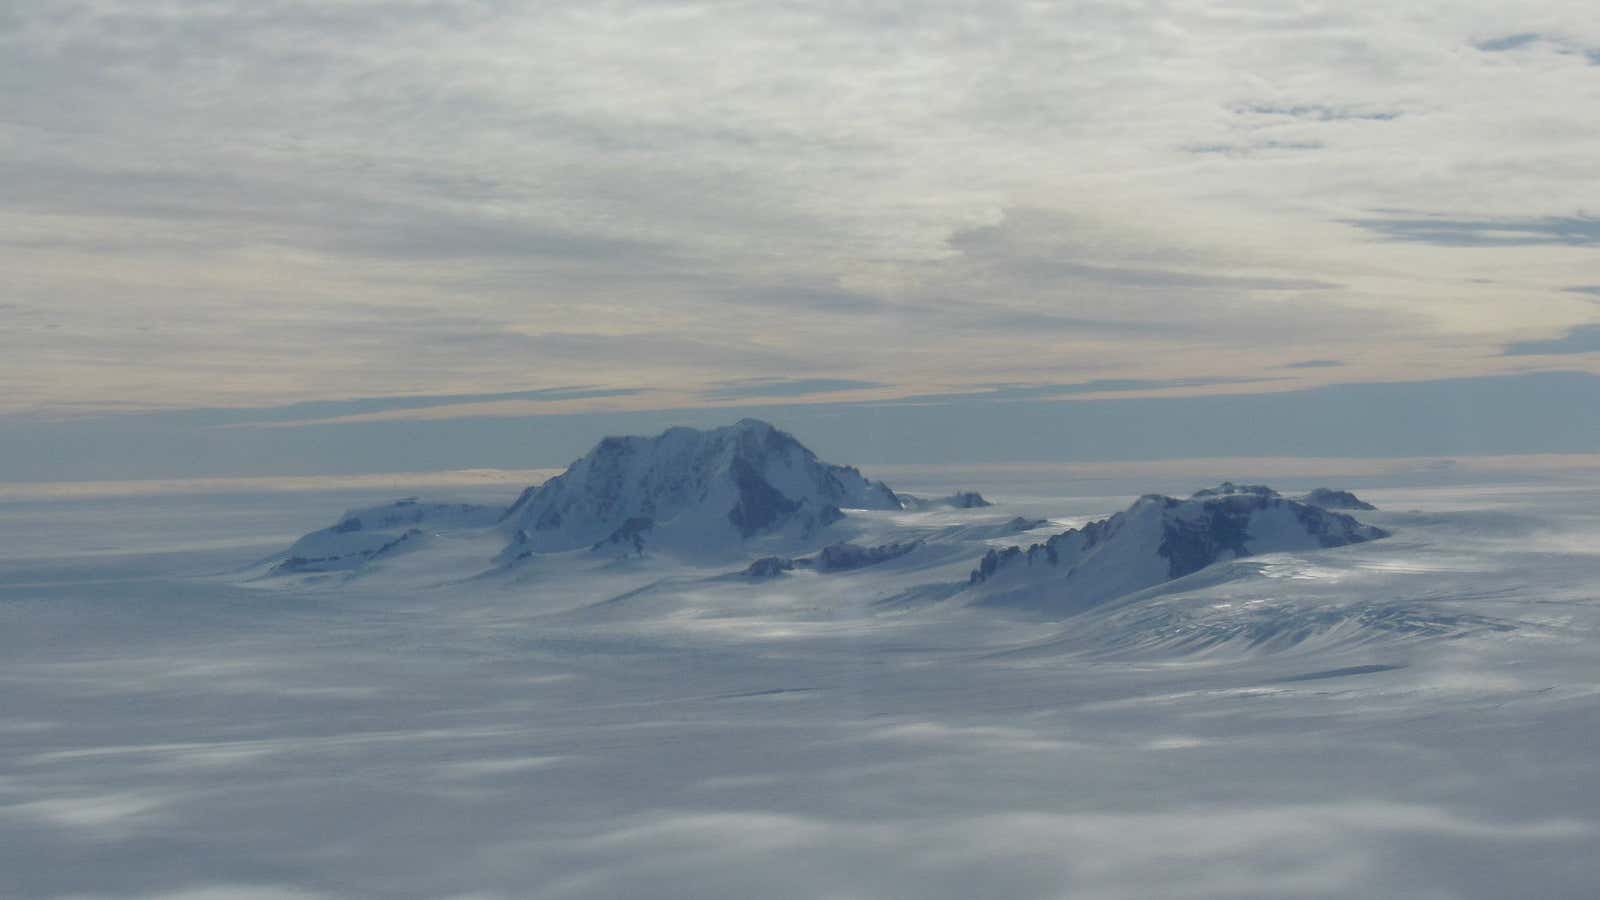 If you’re visiting Antarctica, the mountains are probably not on the itinerary.